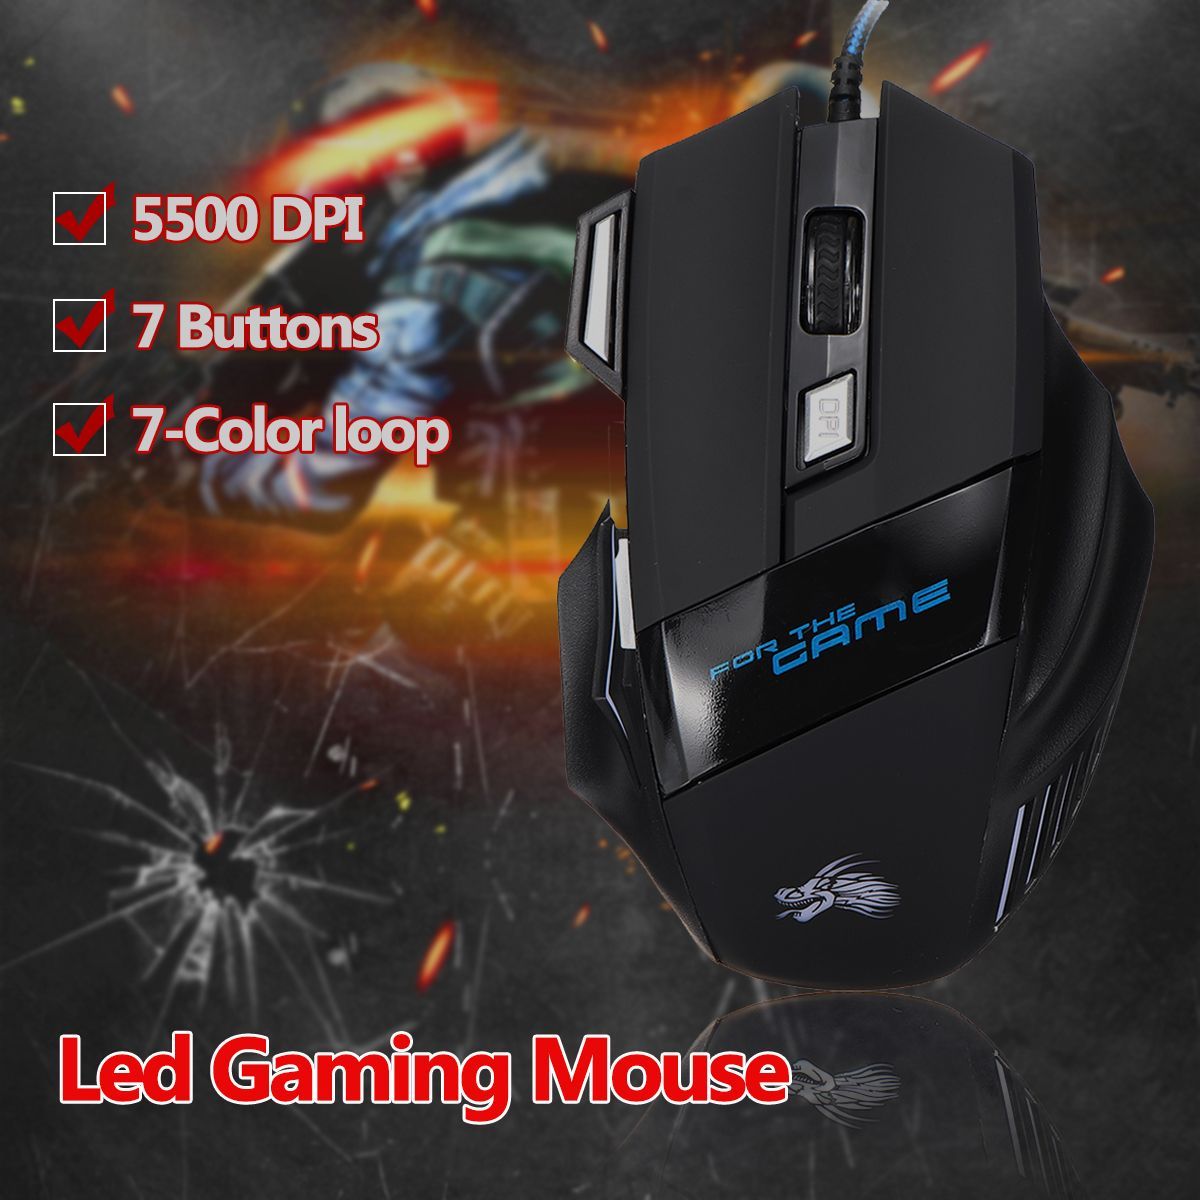 Wired-RGB-Mechanical-Gaming-Mouse-7-Keys-5500DPI-LED-Optical-USB-Mouse-Mice-Game-Mouse-For-PC-Comput-1634053